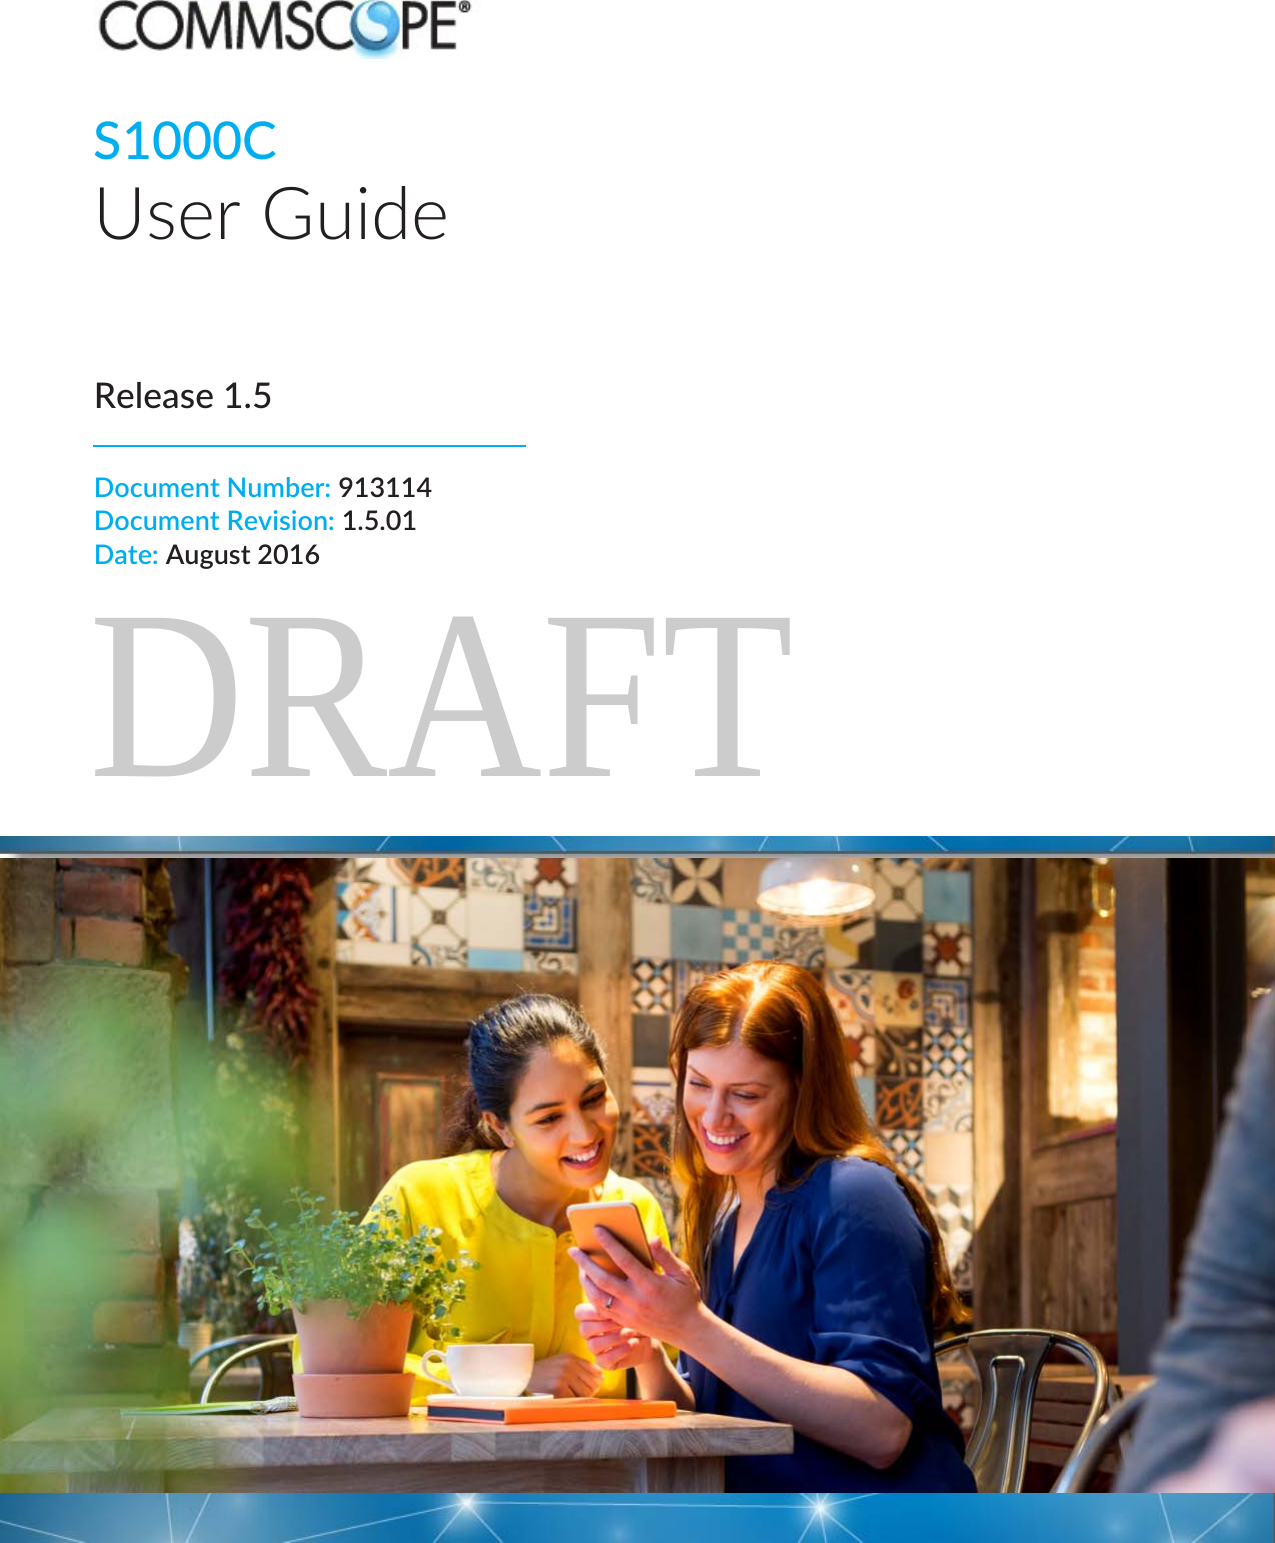 DRAFTUser GuideRelease 1.5Document Number: 913114 Document Revision: 1.5.01Date: August 2016S1000C